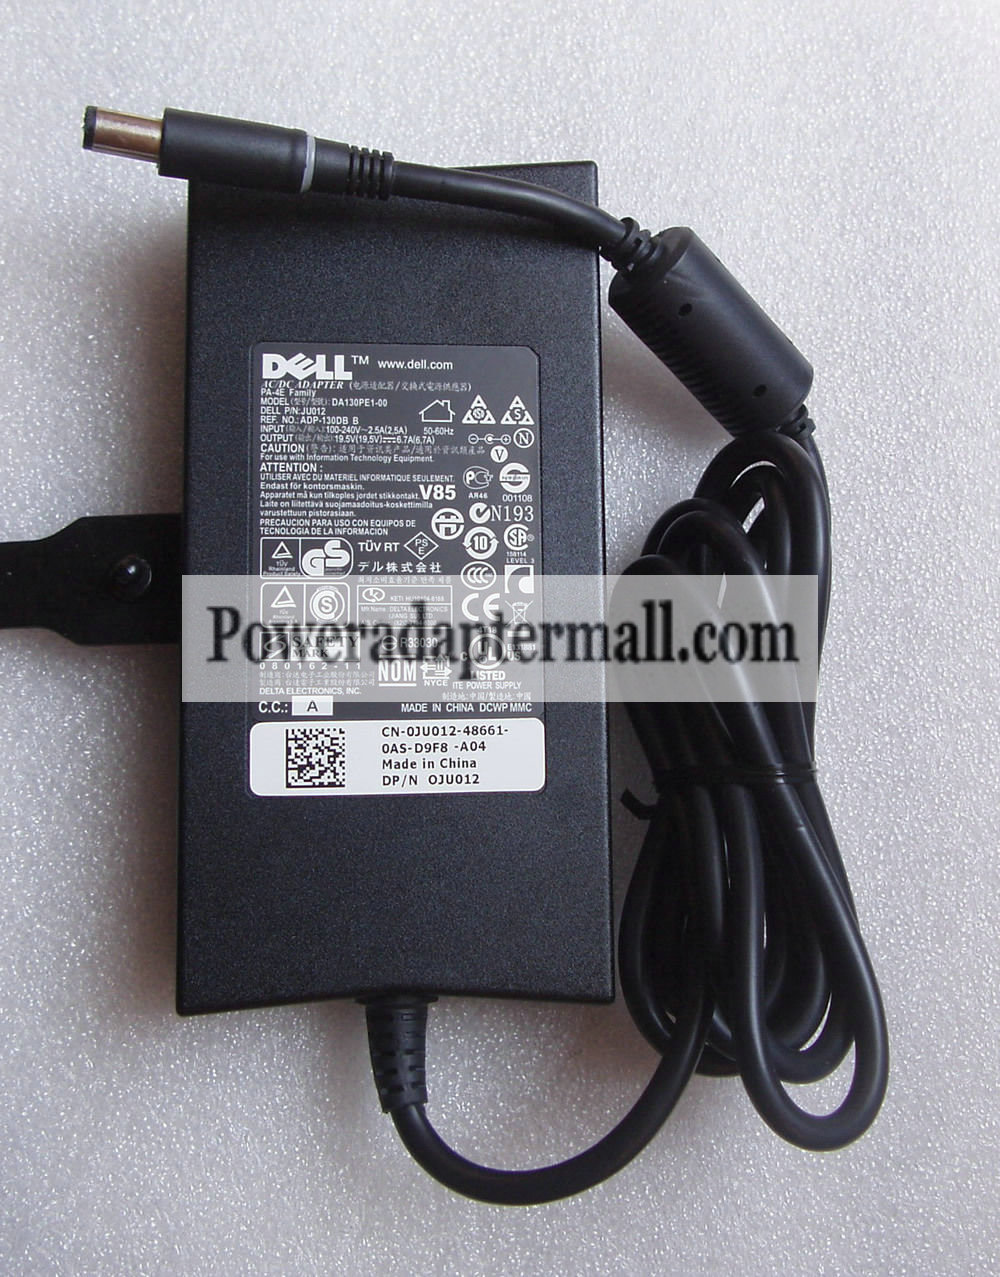 Genuine 130W Dell Slim PA-4E PA-13 AC Power Adapter Charge